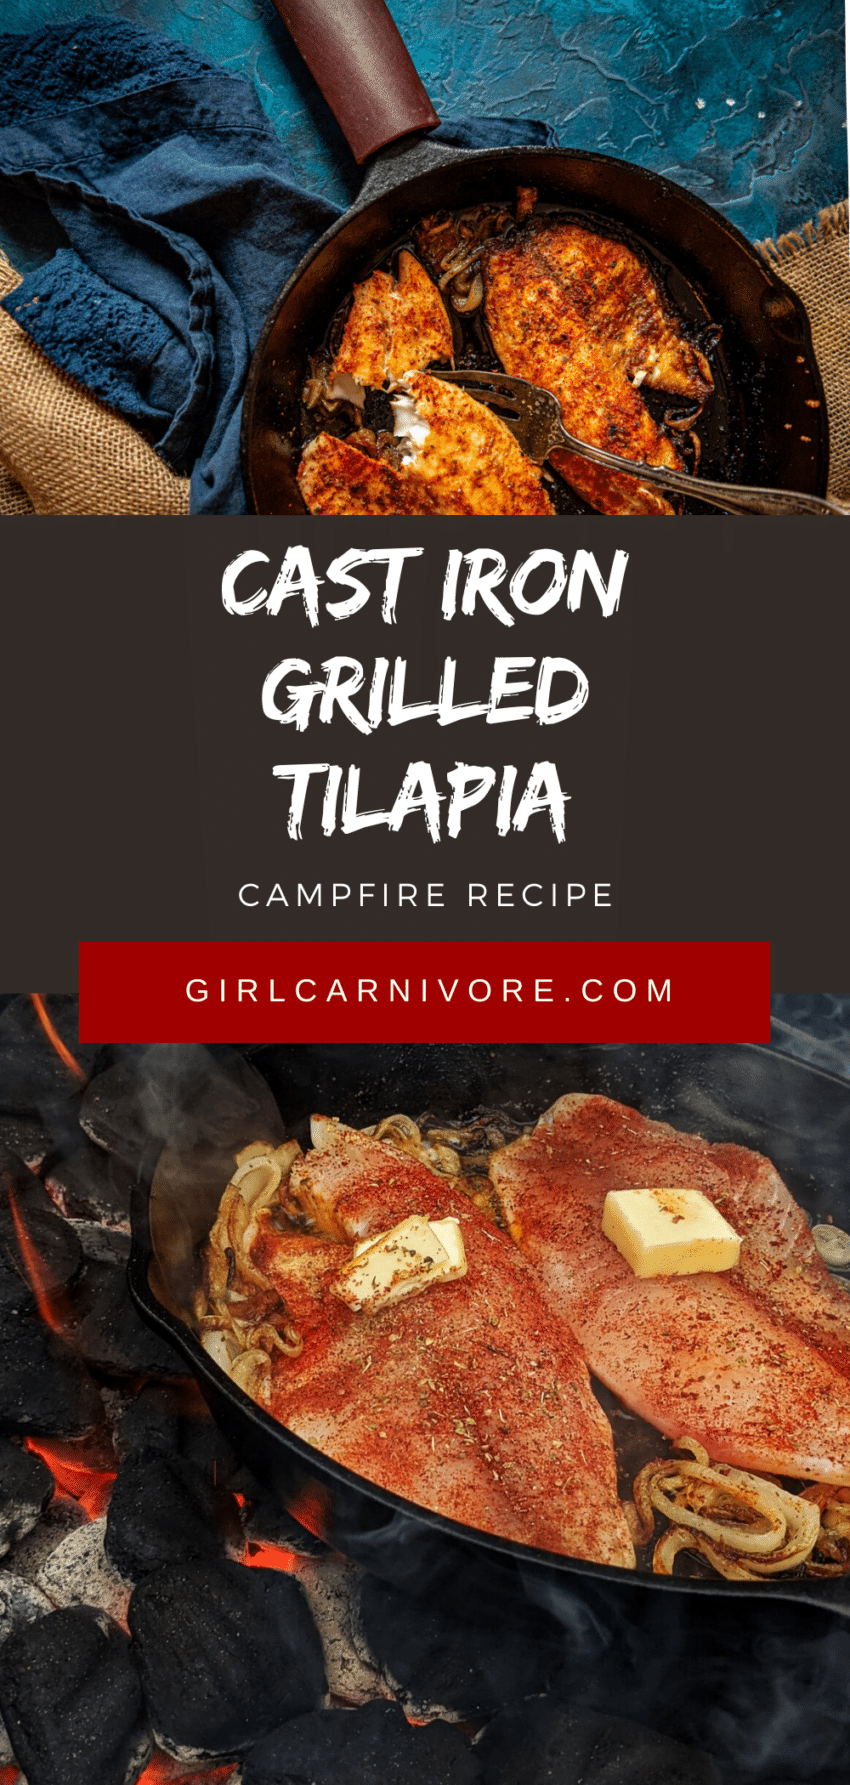 Cast Iron Grilled Tilapia Over Charocal Girl Carnivore 